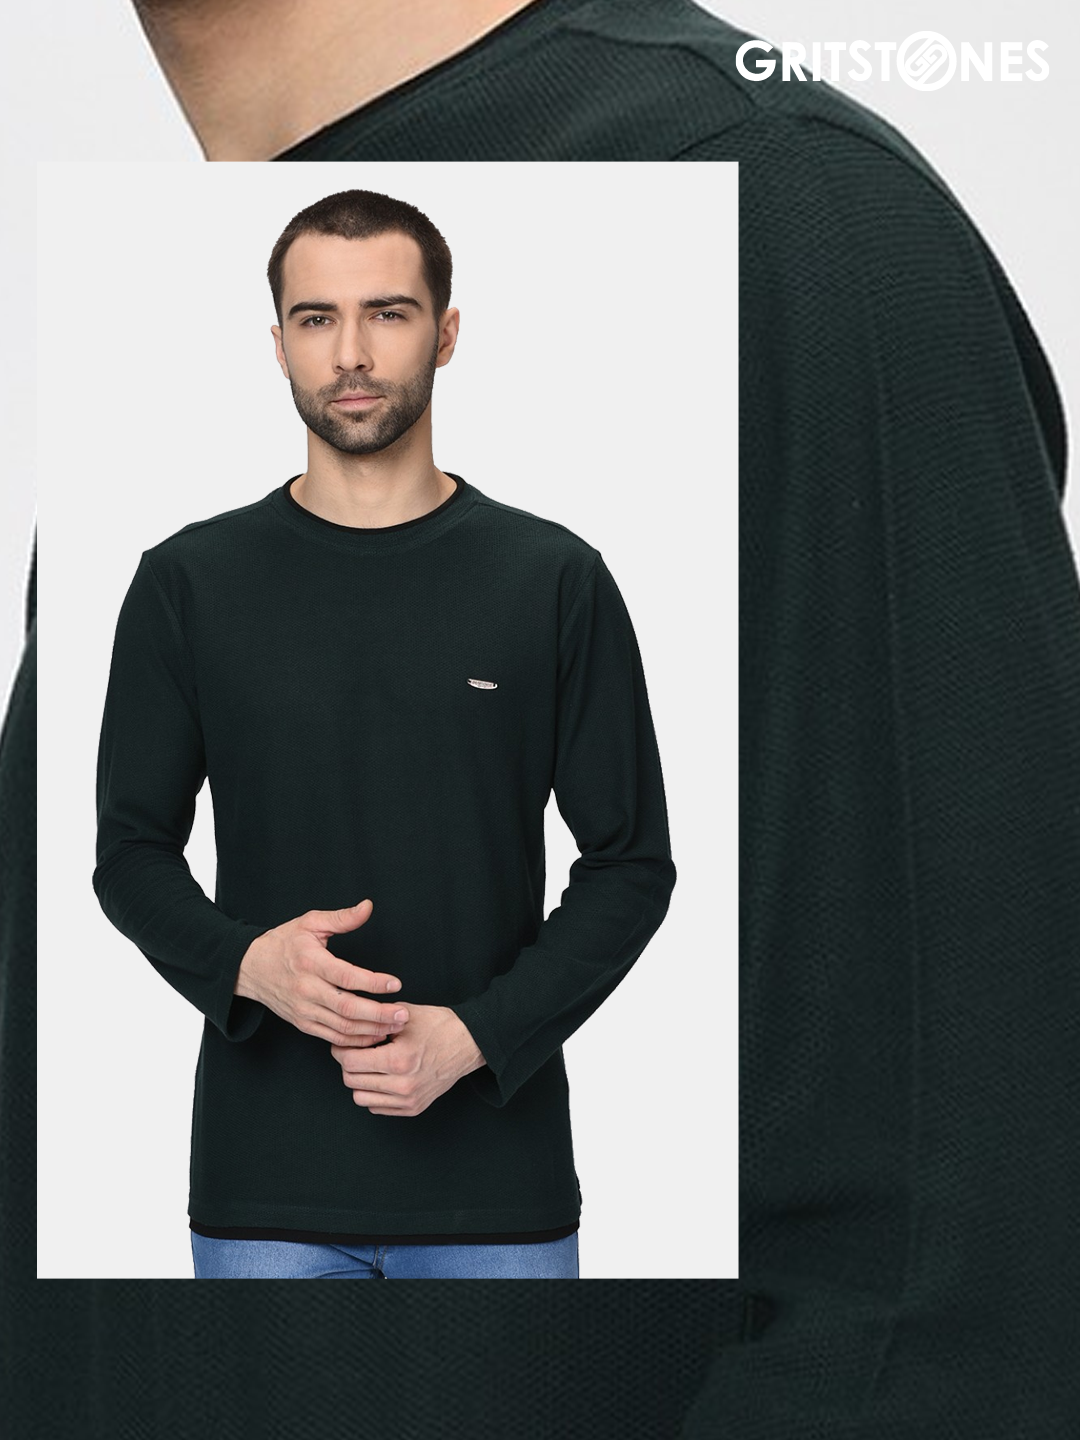 Dark Green Full Sleeves Waffle Knit Crew Neck With black Contrast Piping T-Shirt